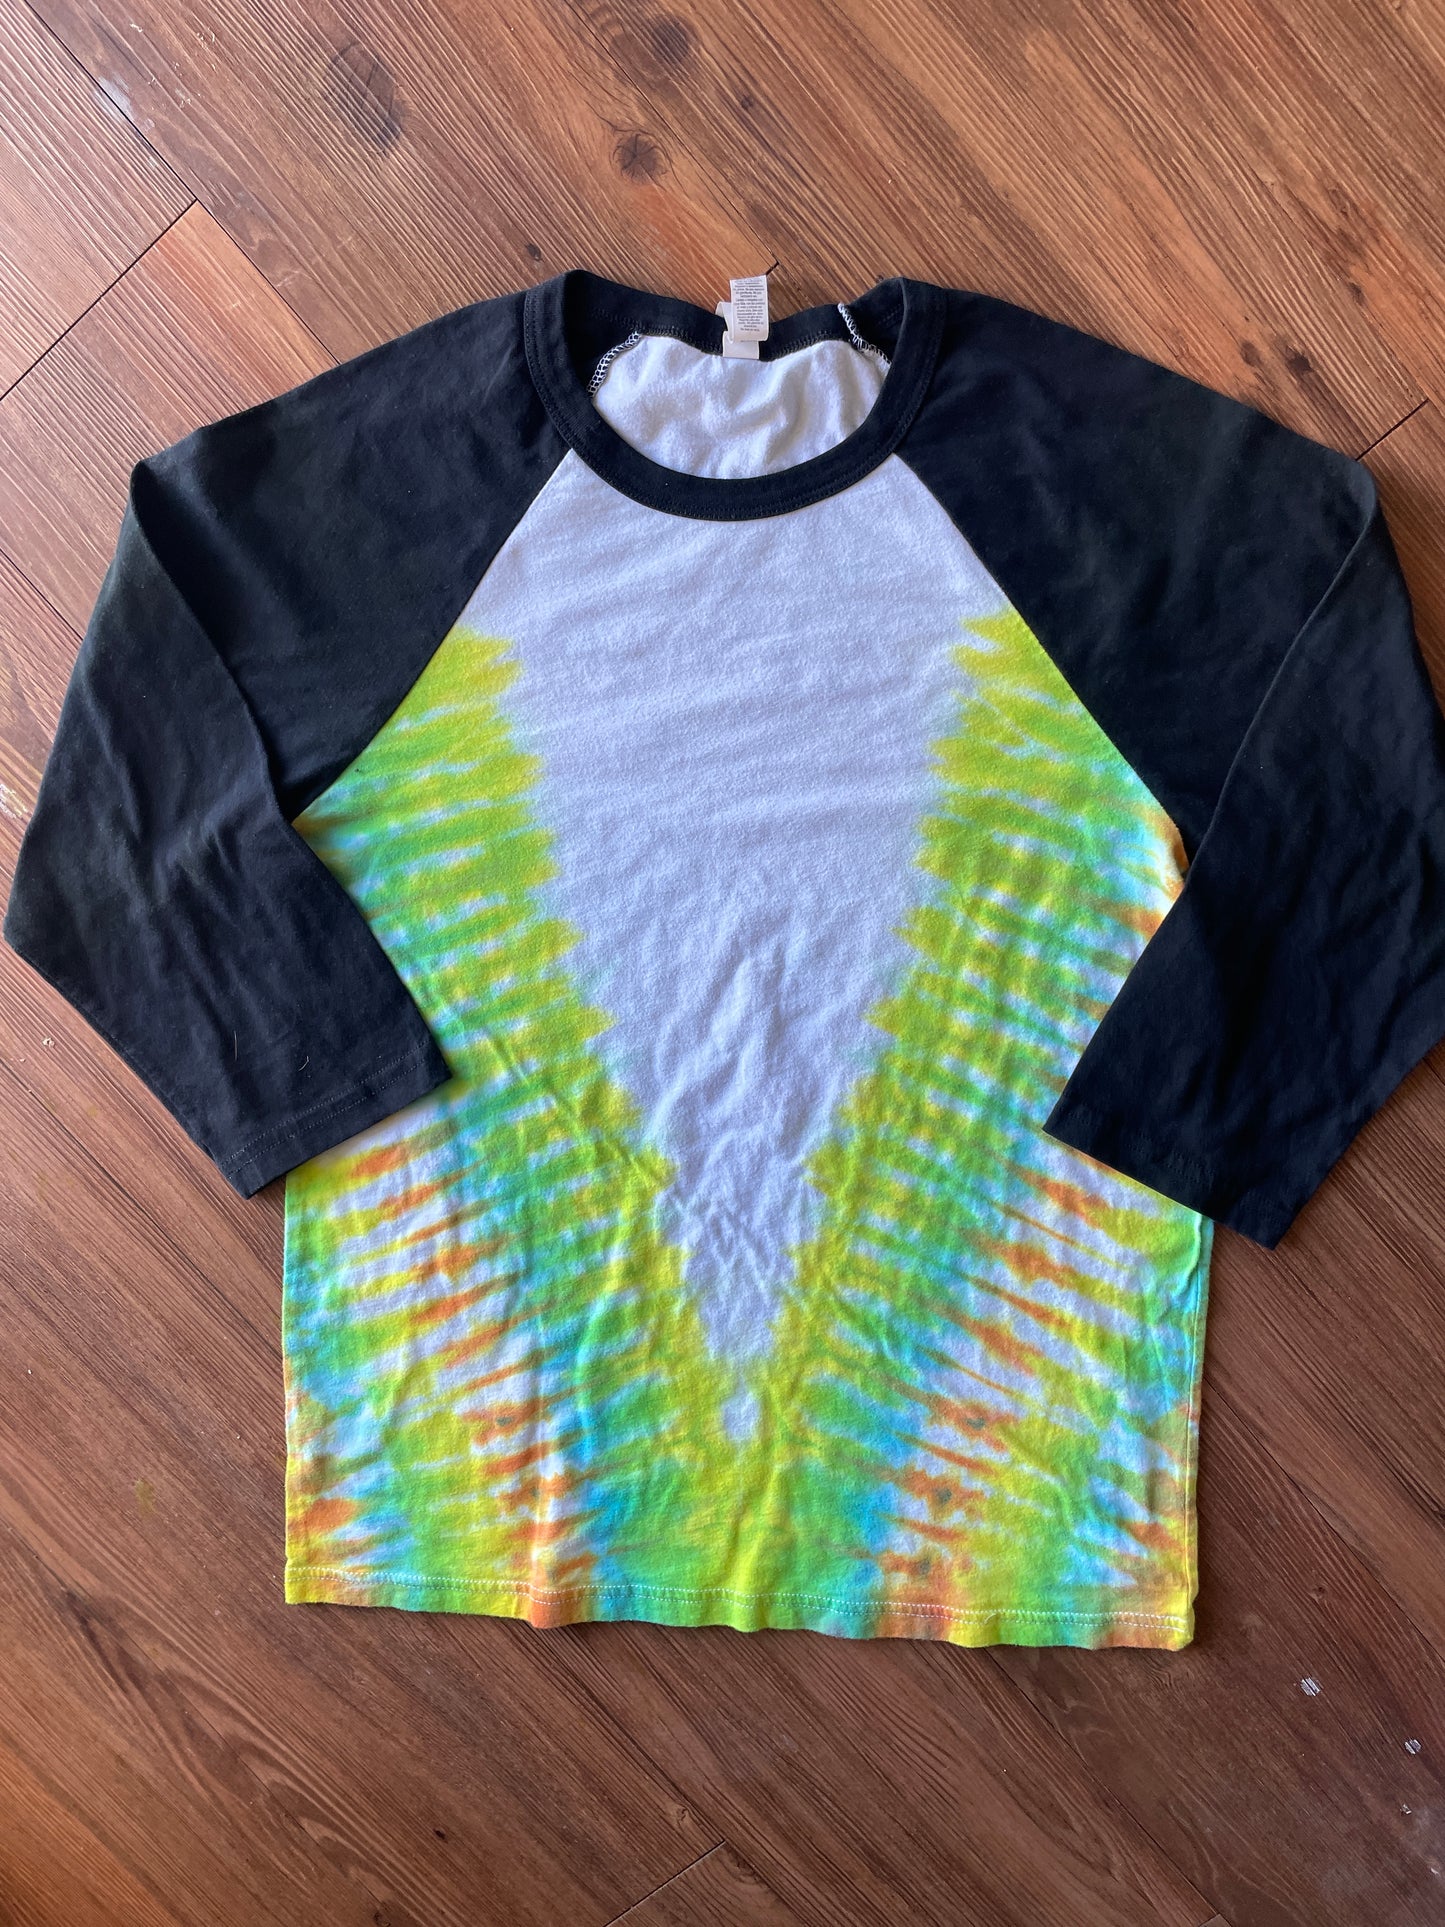 MEDIUM Men’s Glass Animals How to Be a Human Being Handmade Tie Dye T-Shirt | One-Of-a-Kind Multicolor Pleated Short Sleeve